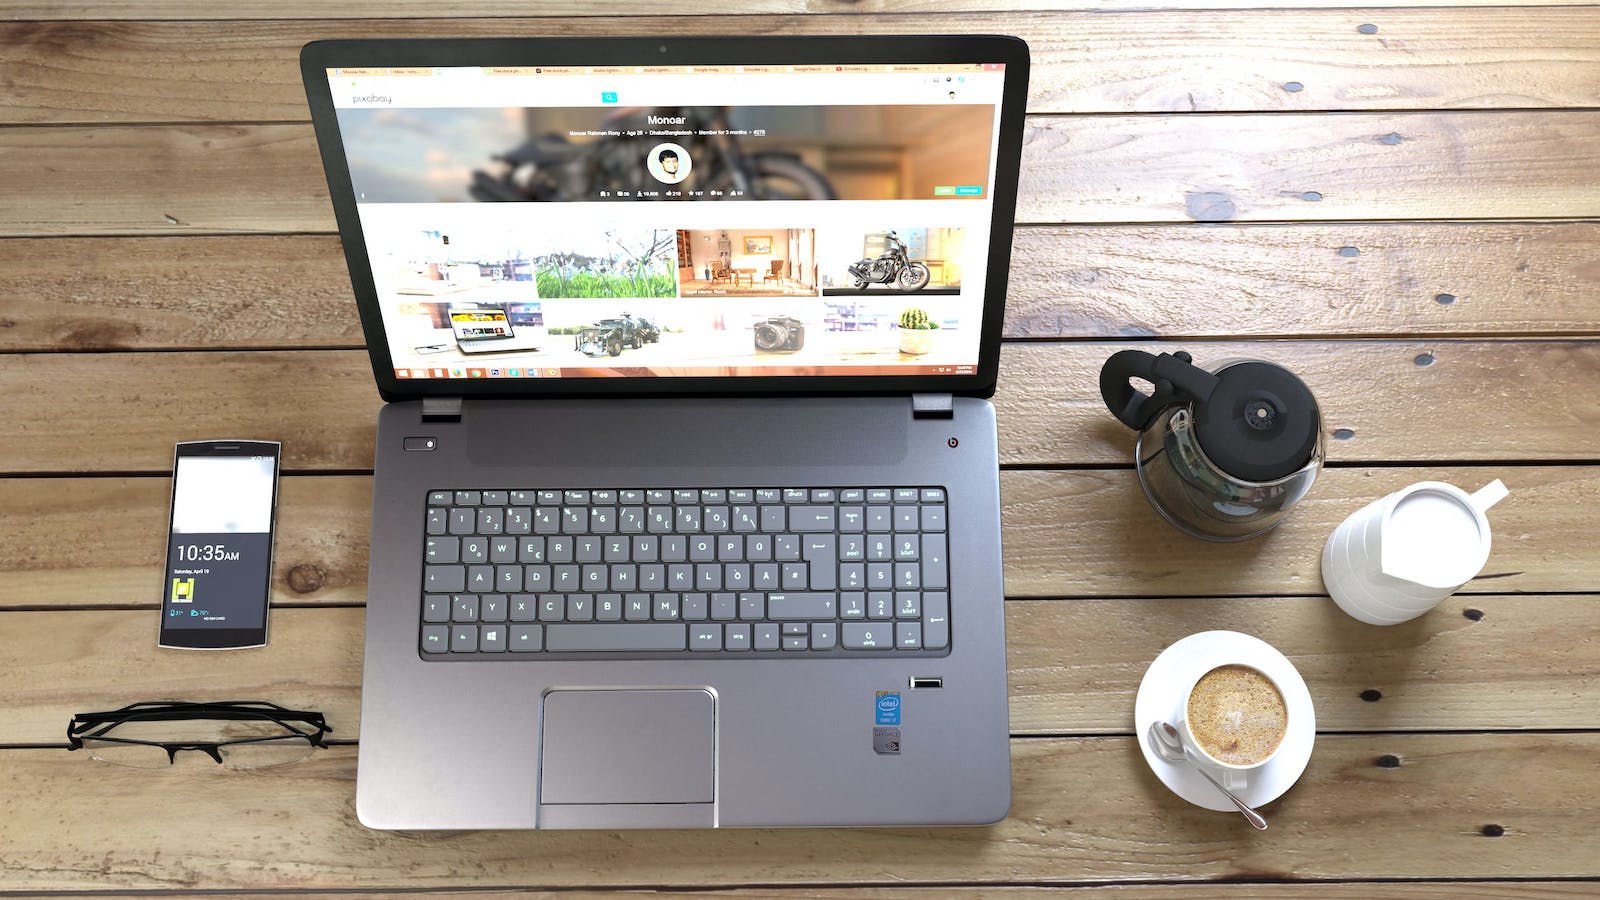 Overhead view of a laptop with a web browser up alongside a phone and cup of coffee